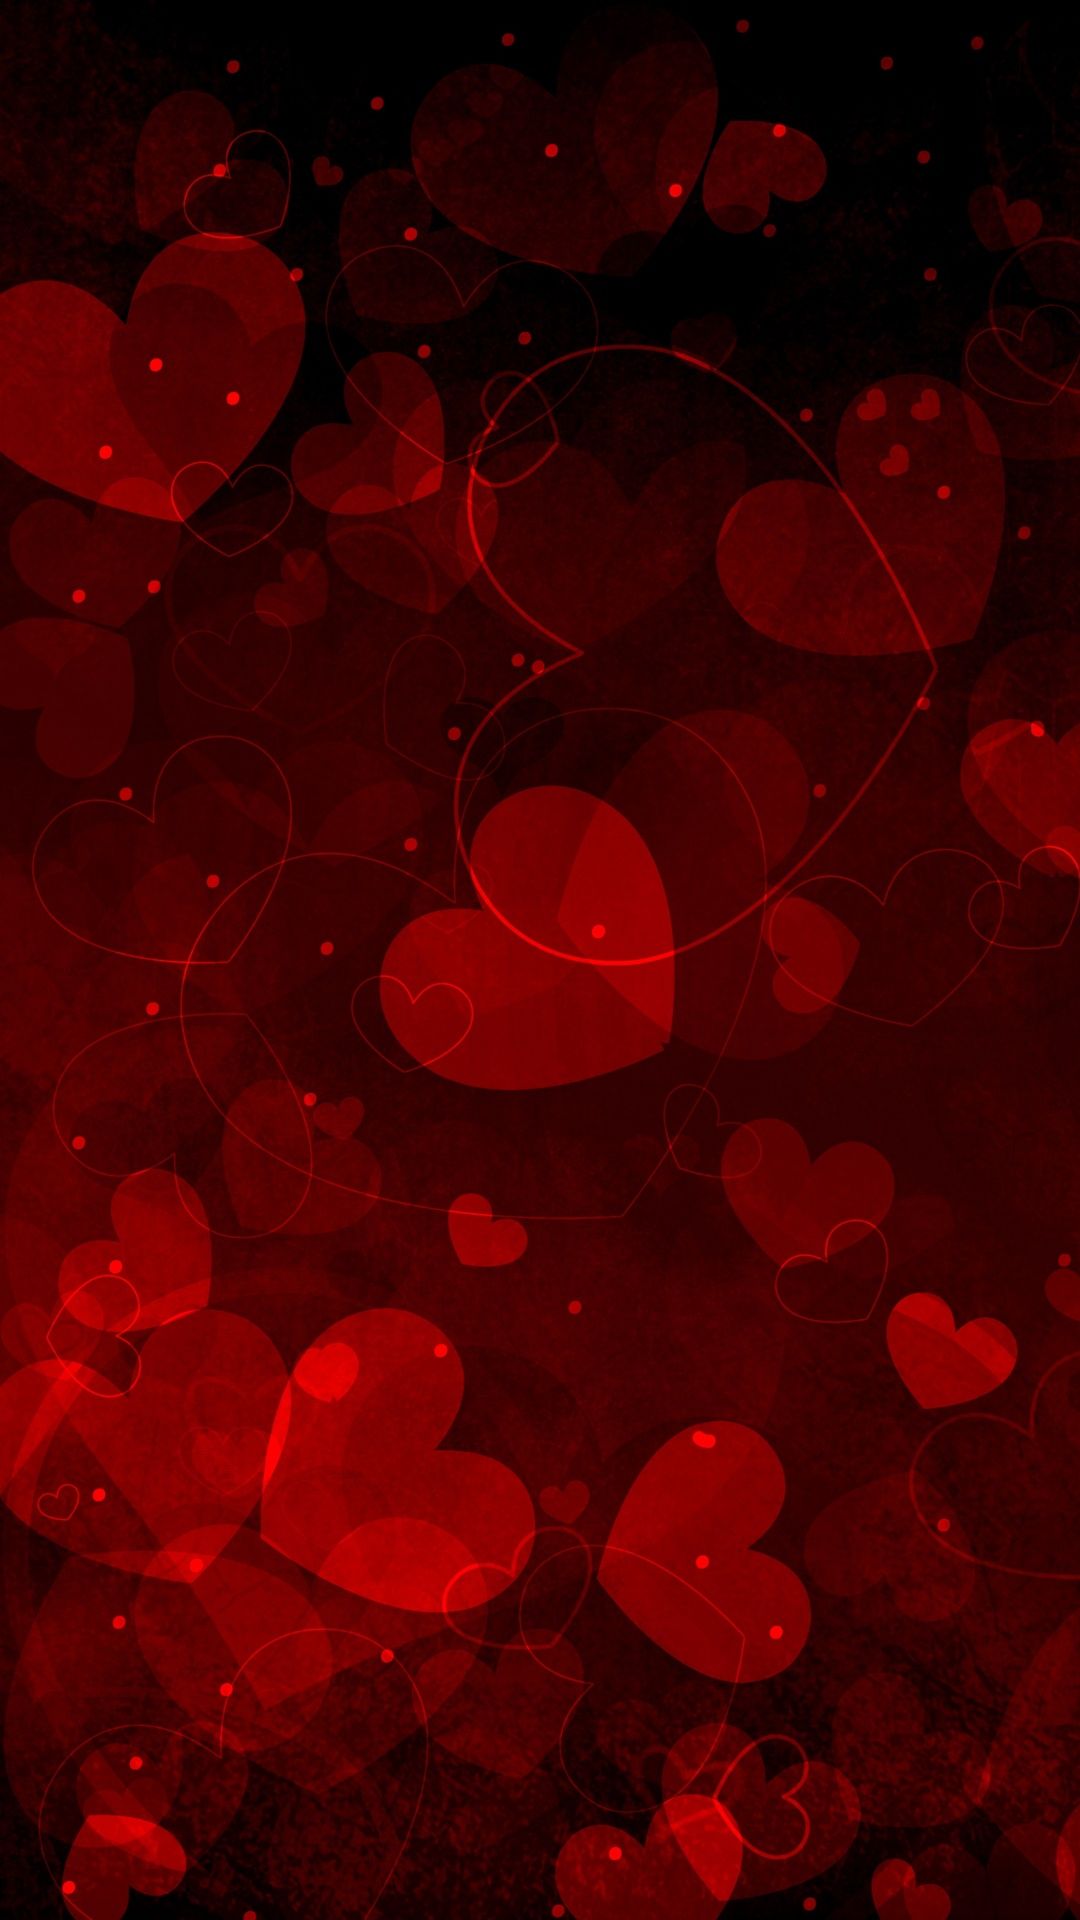 Red Hearts Art Valentine Android wallpaper. Valentines wallpaper iphone, Valentines wallpaper, Heart wallpaper